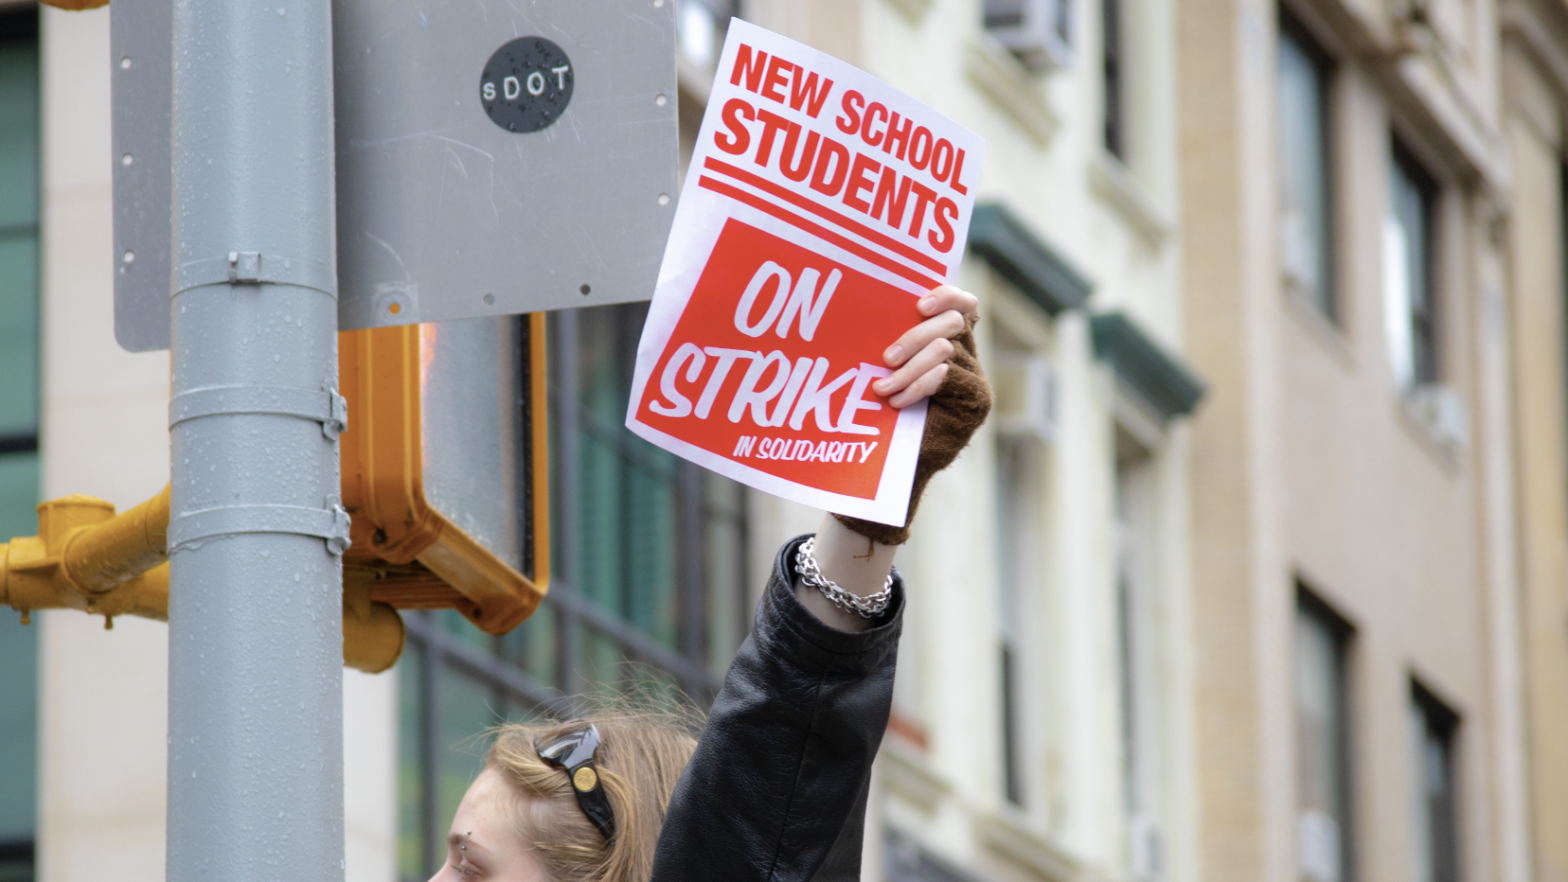 Student holding a sign saying "New School Students on strike in solidarity"